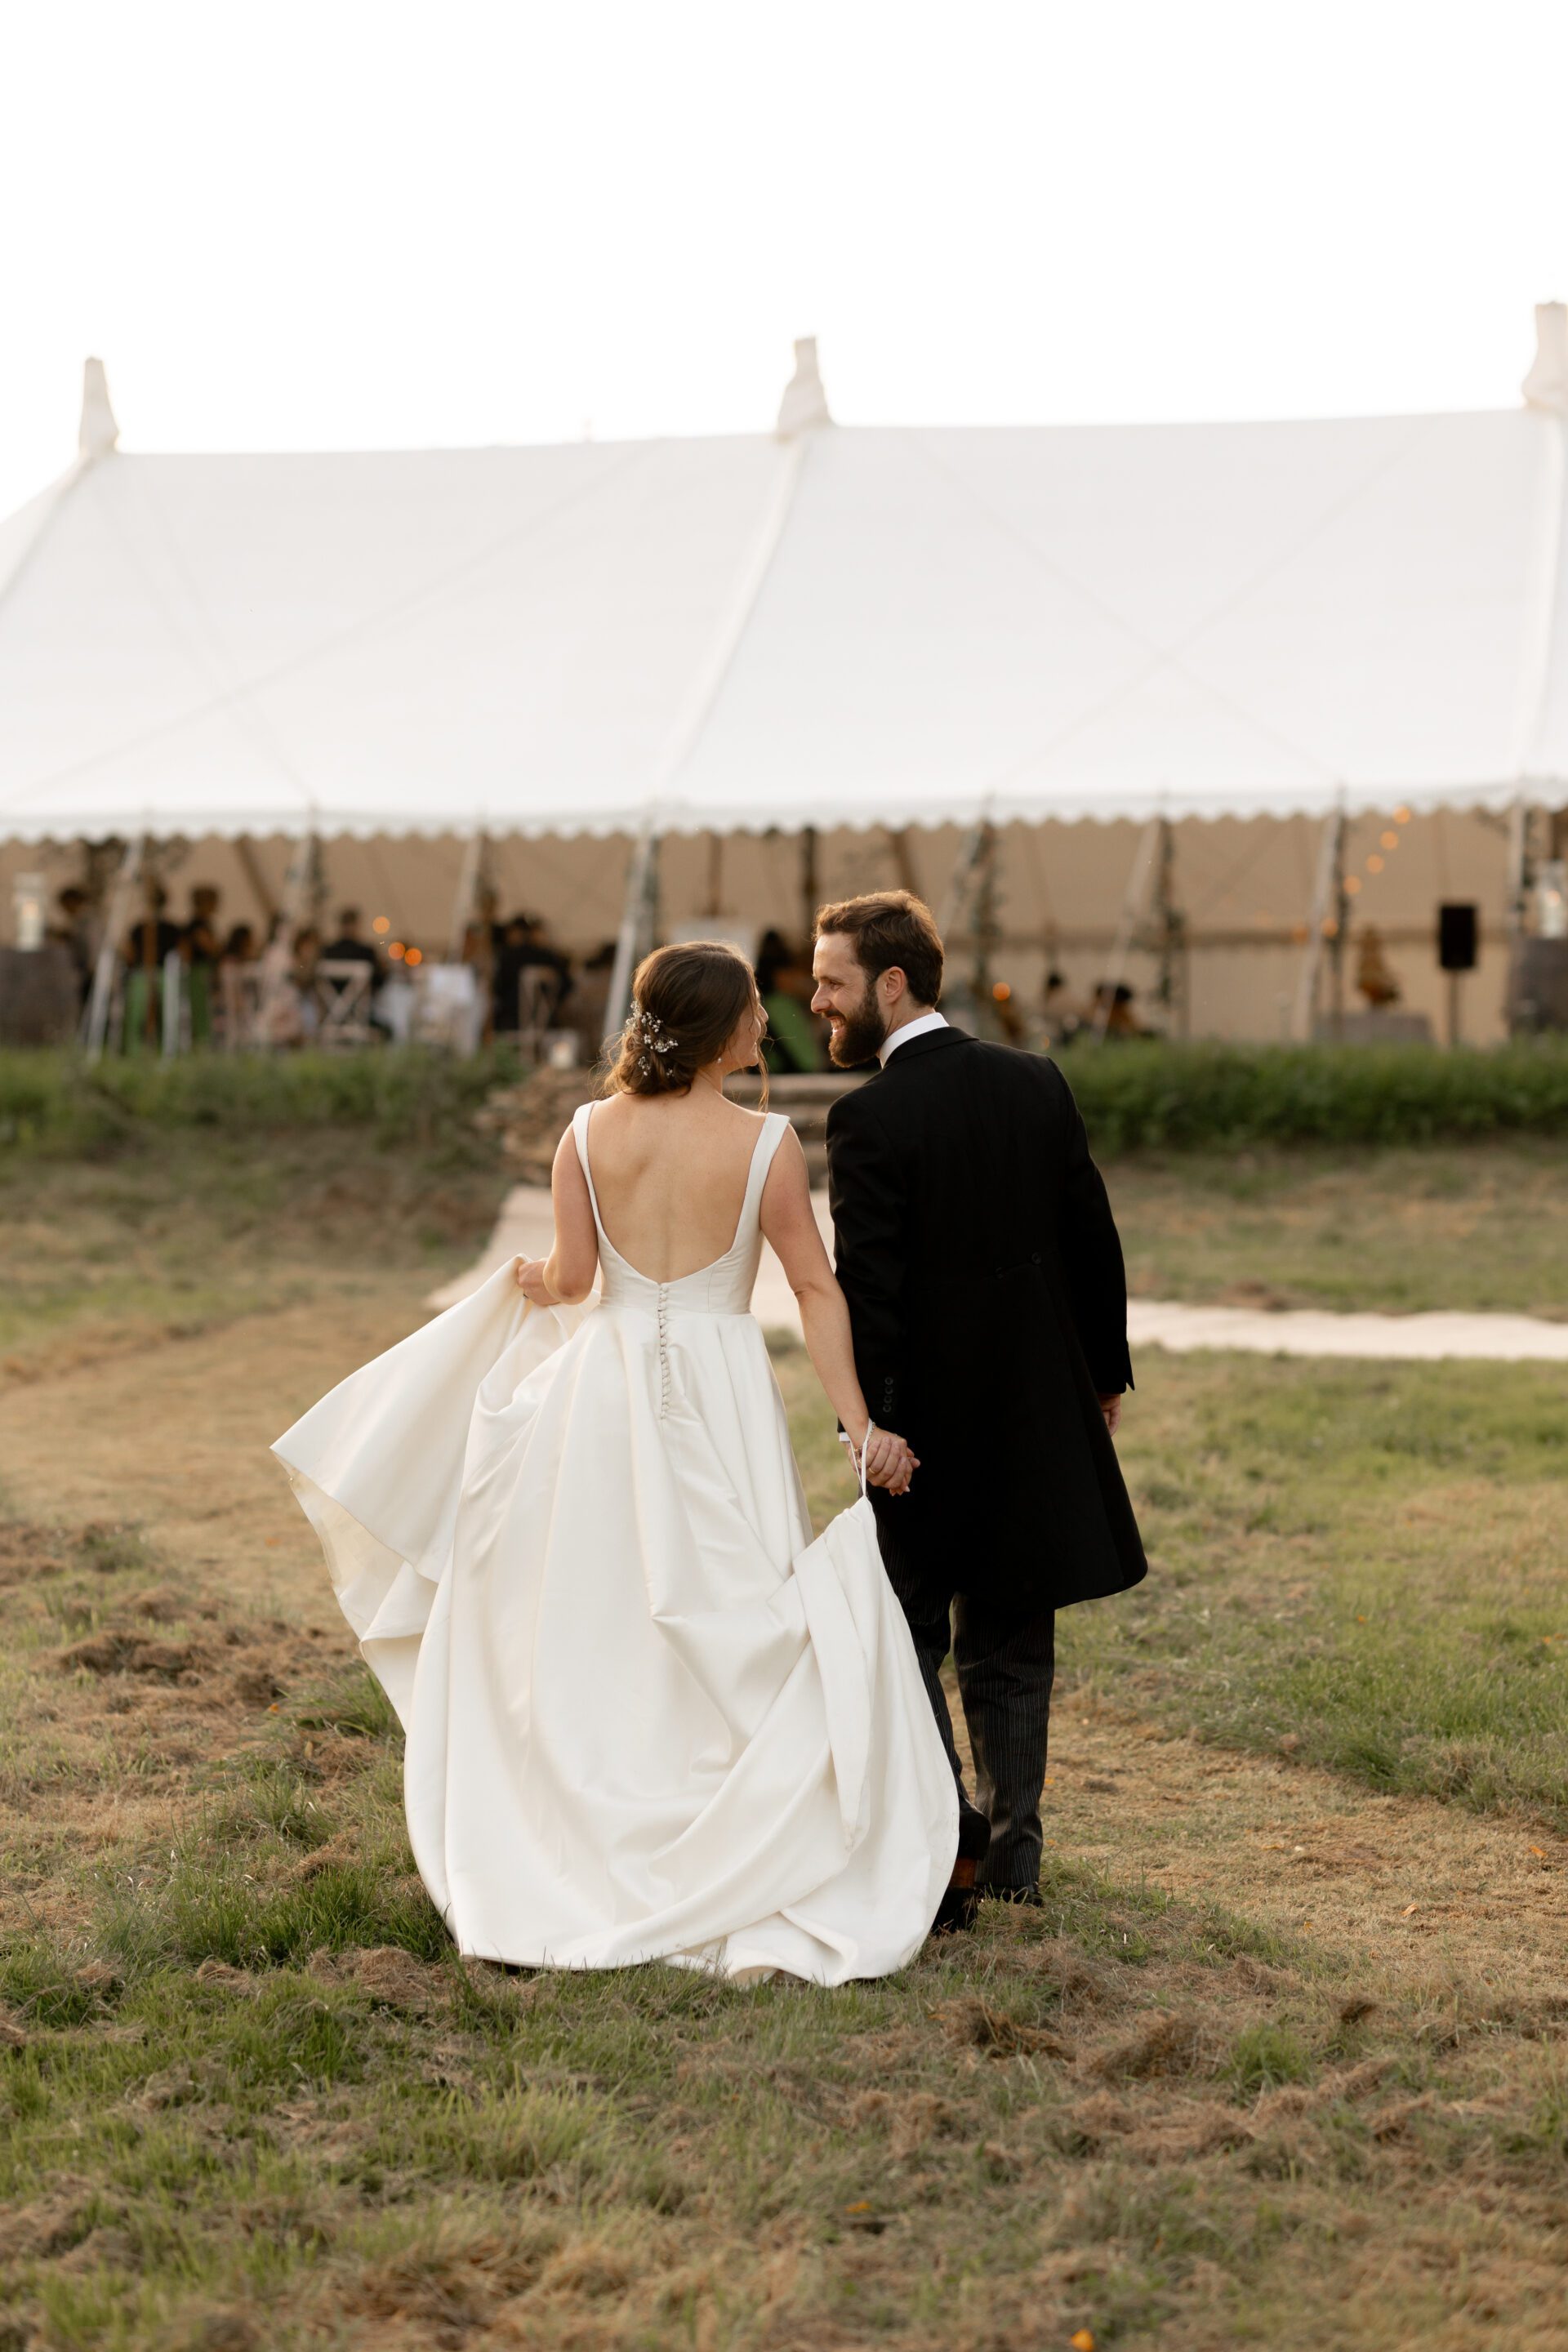 The bride and groom enjoying their Somerset marquee wedding